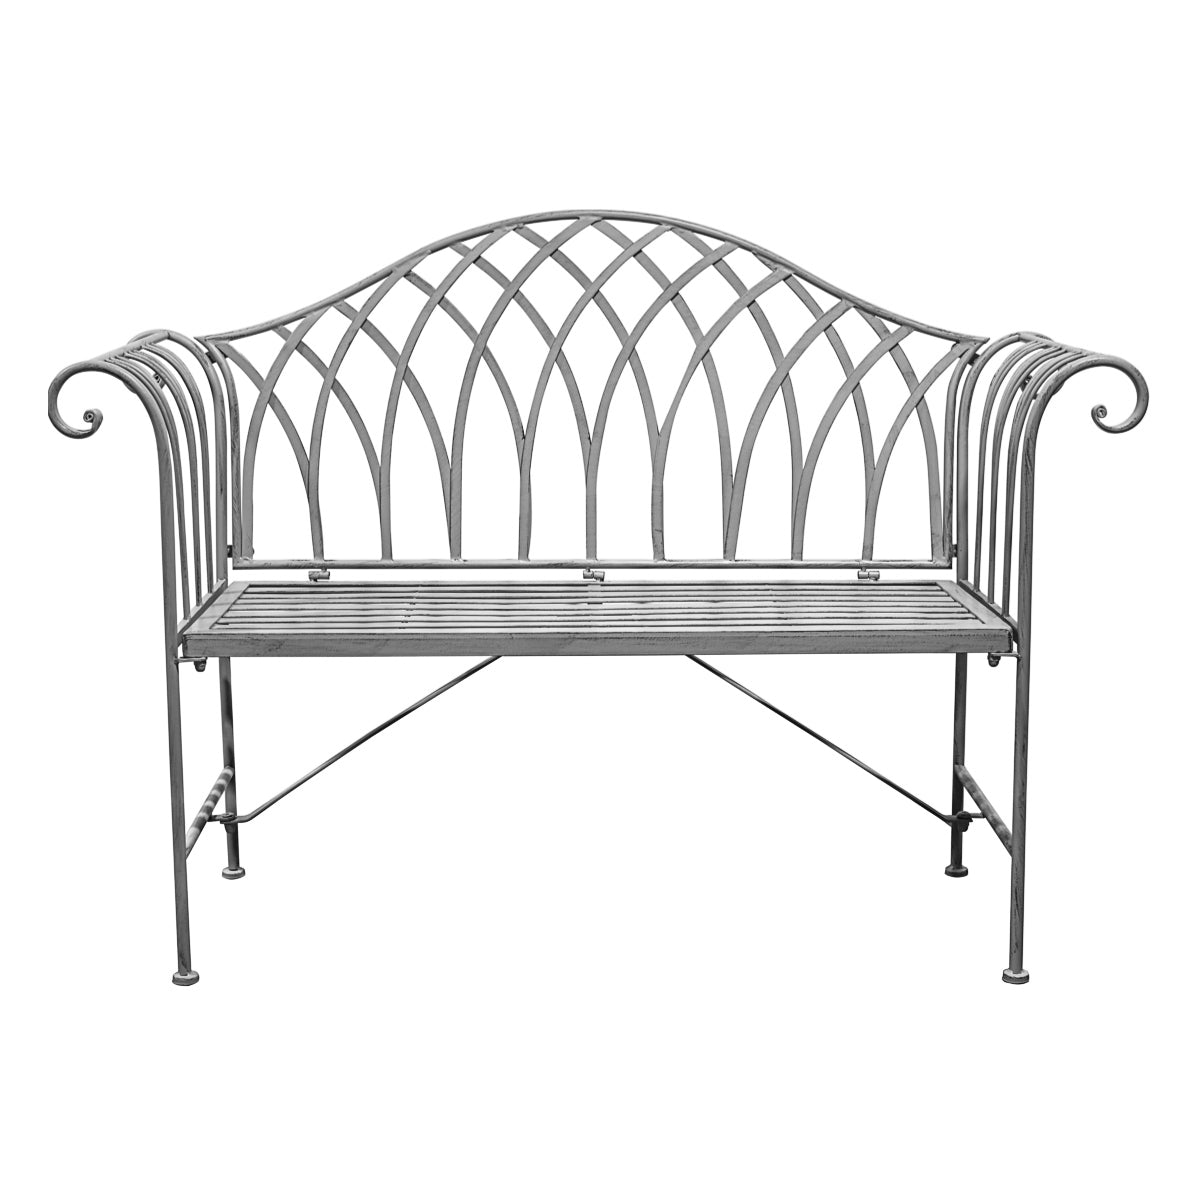 An exquisite Noss Outdoor Bench Estate featuring a wrought iron frame, perfect for interior decor and home furniture.